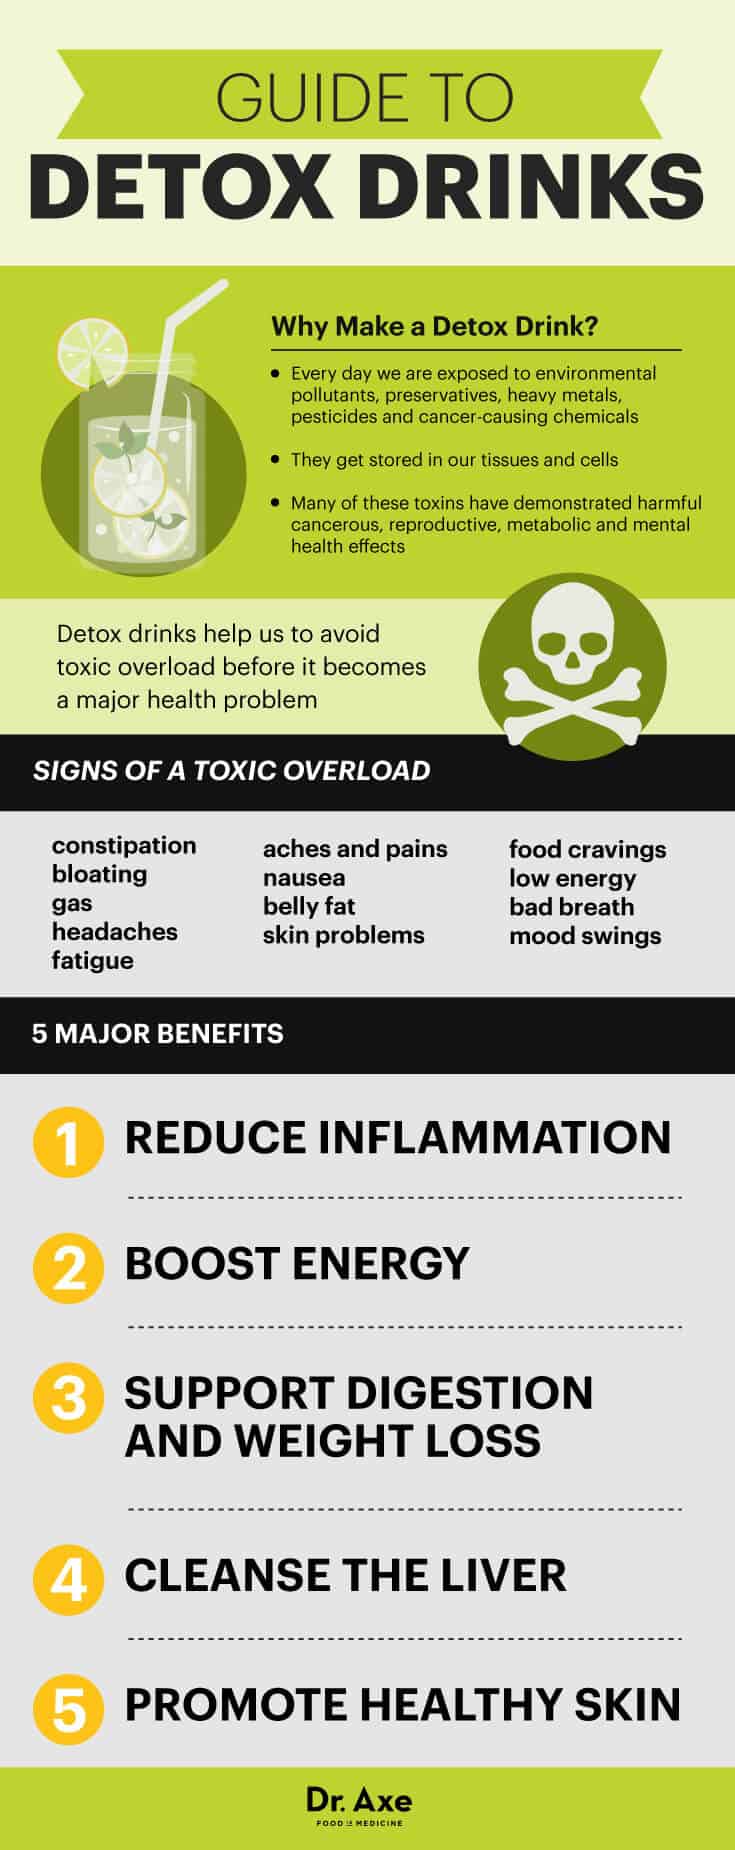 Detox Drinks How To Make Them 5 Benefits Of Detox Drinks Dr Axe